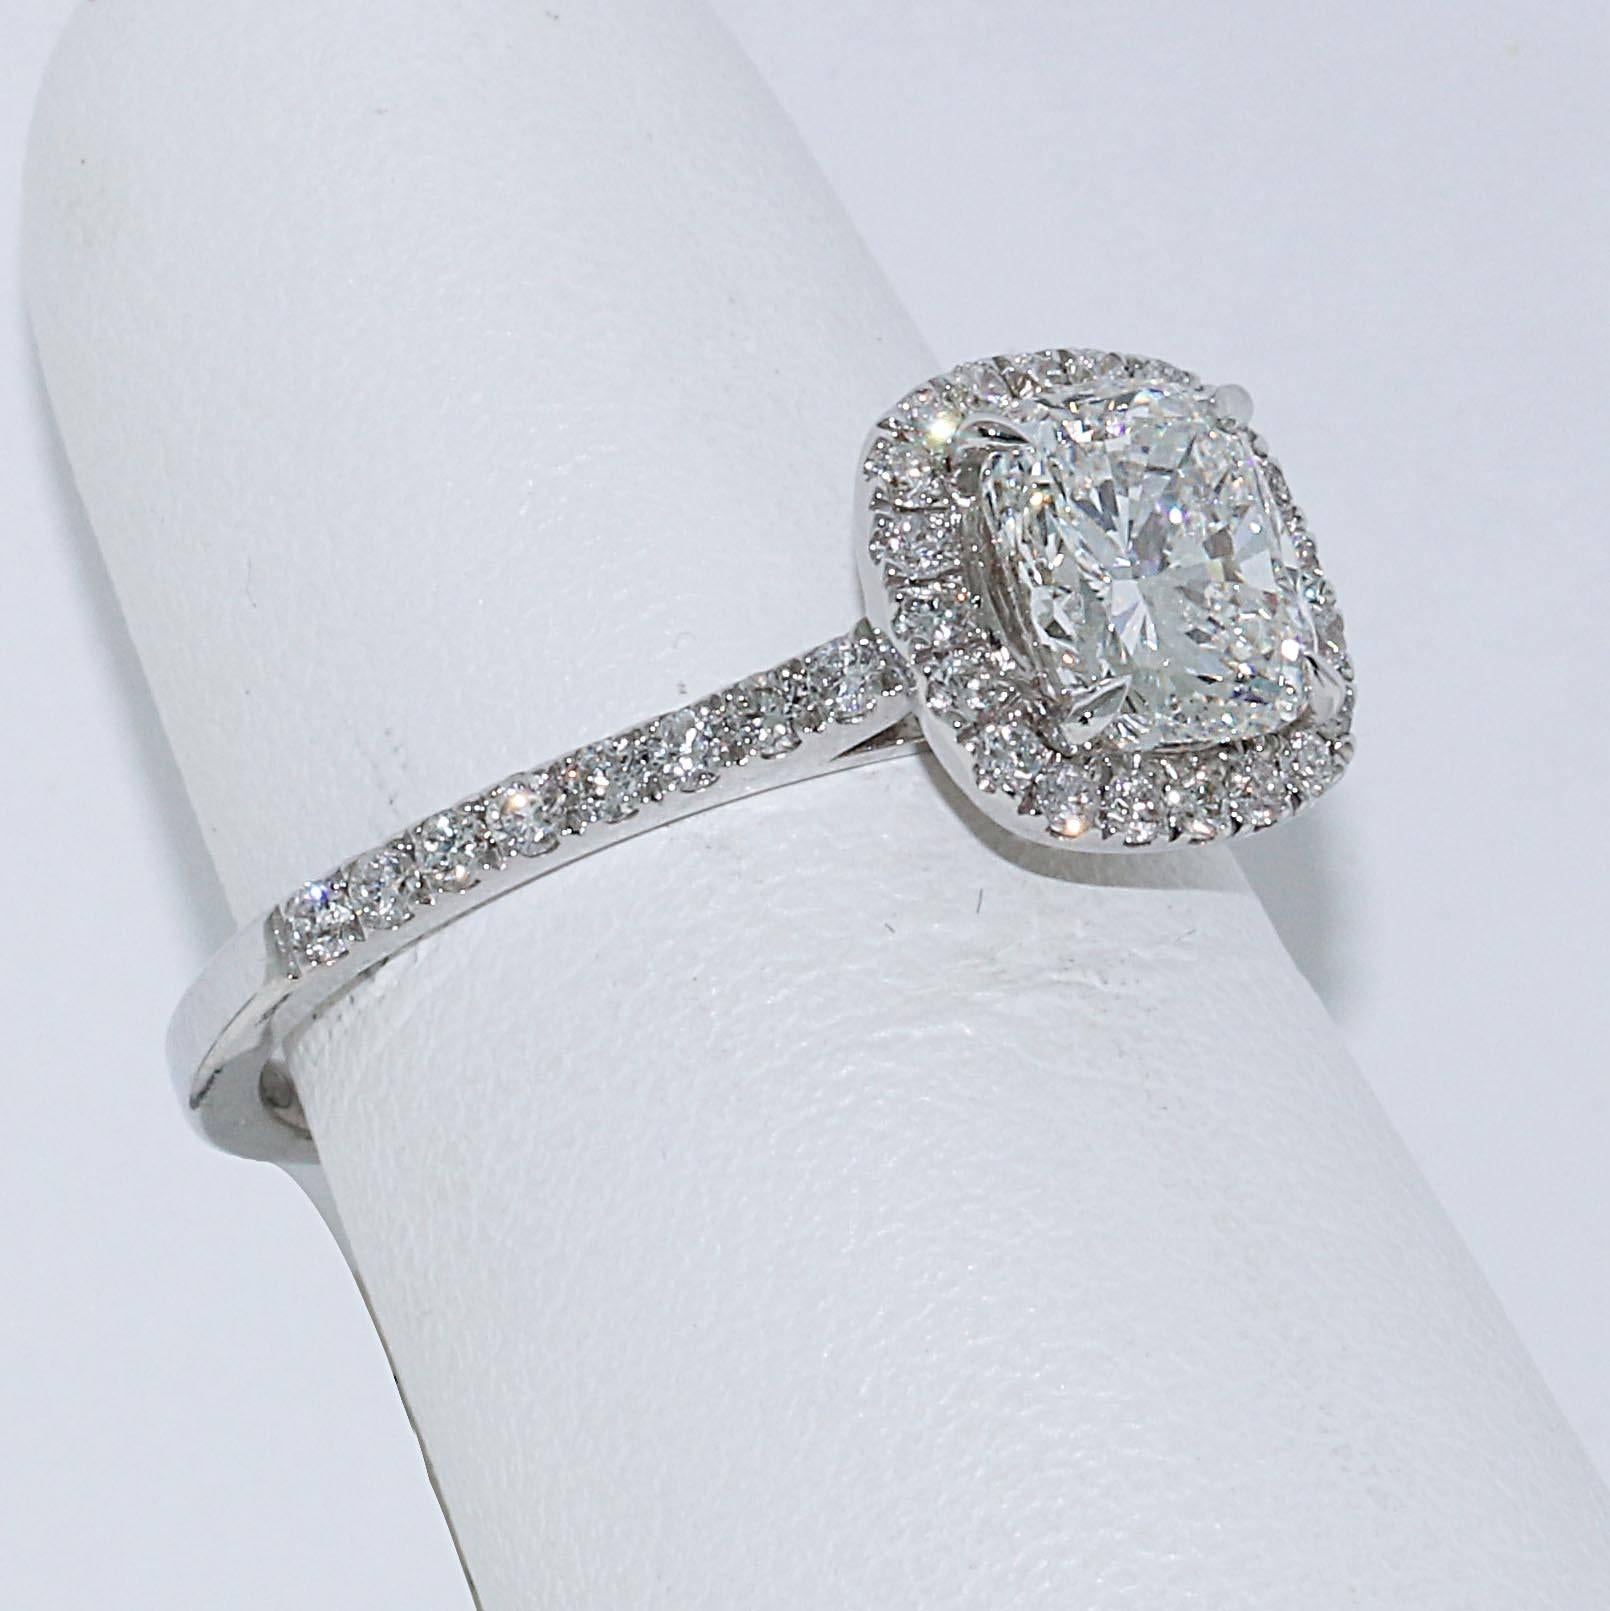 If you are looking to get engaged, this is the ideal ring for you. An ideal cut 1.21 G/VVS2 cushion cut diamond set in a gorgeous halo with a pave band. G color is in the near colorless category meaning the diamond will show bright white. VVS2 is